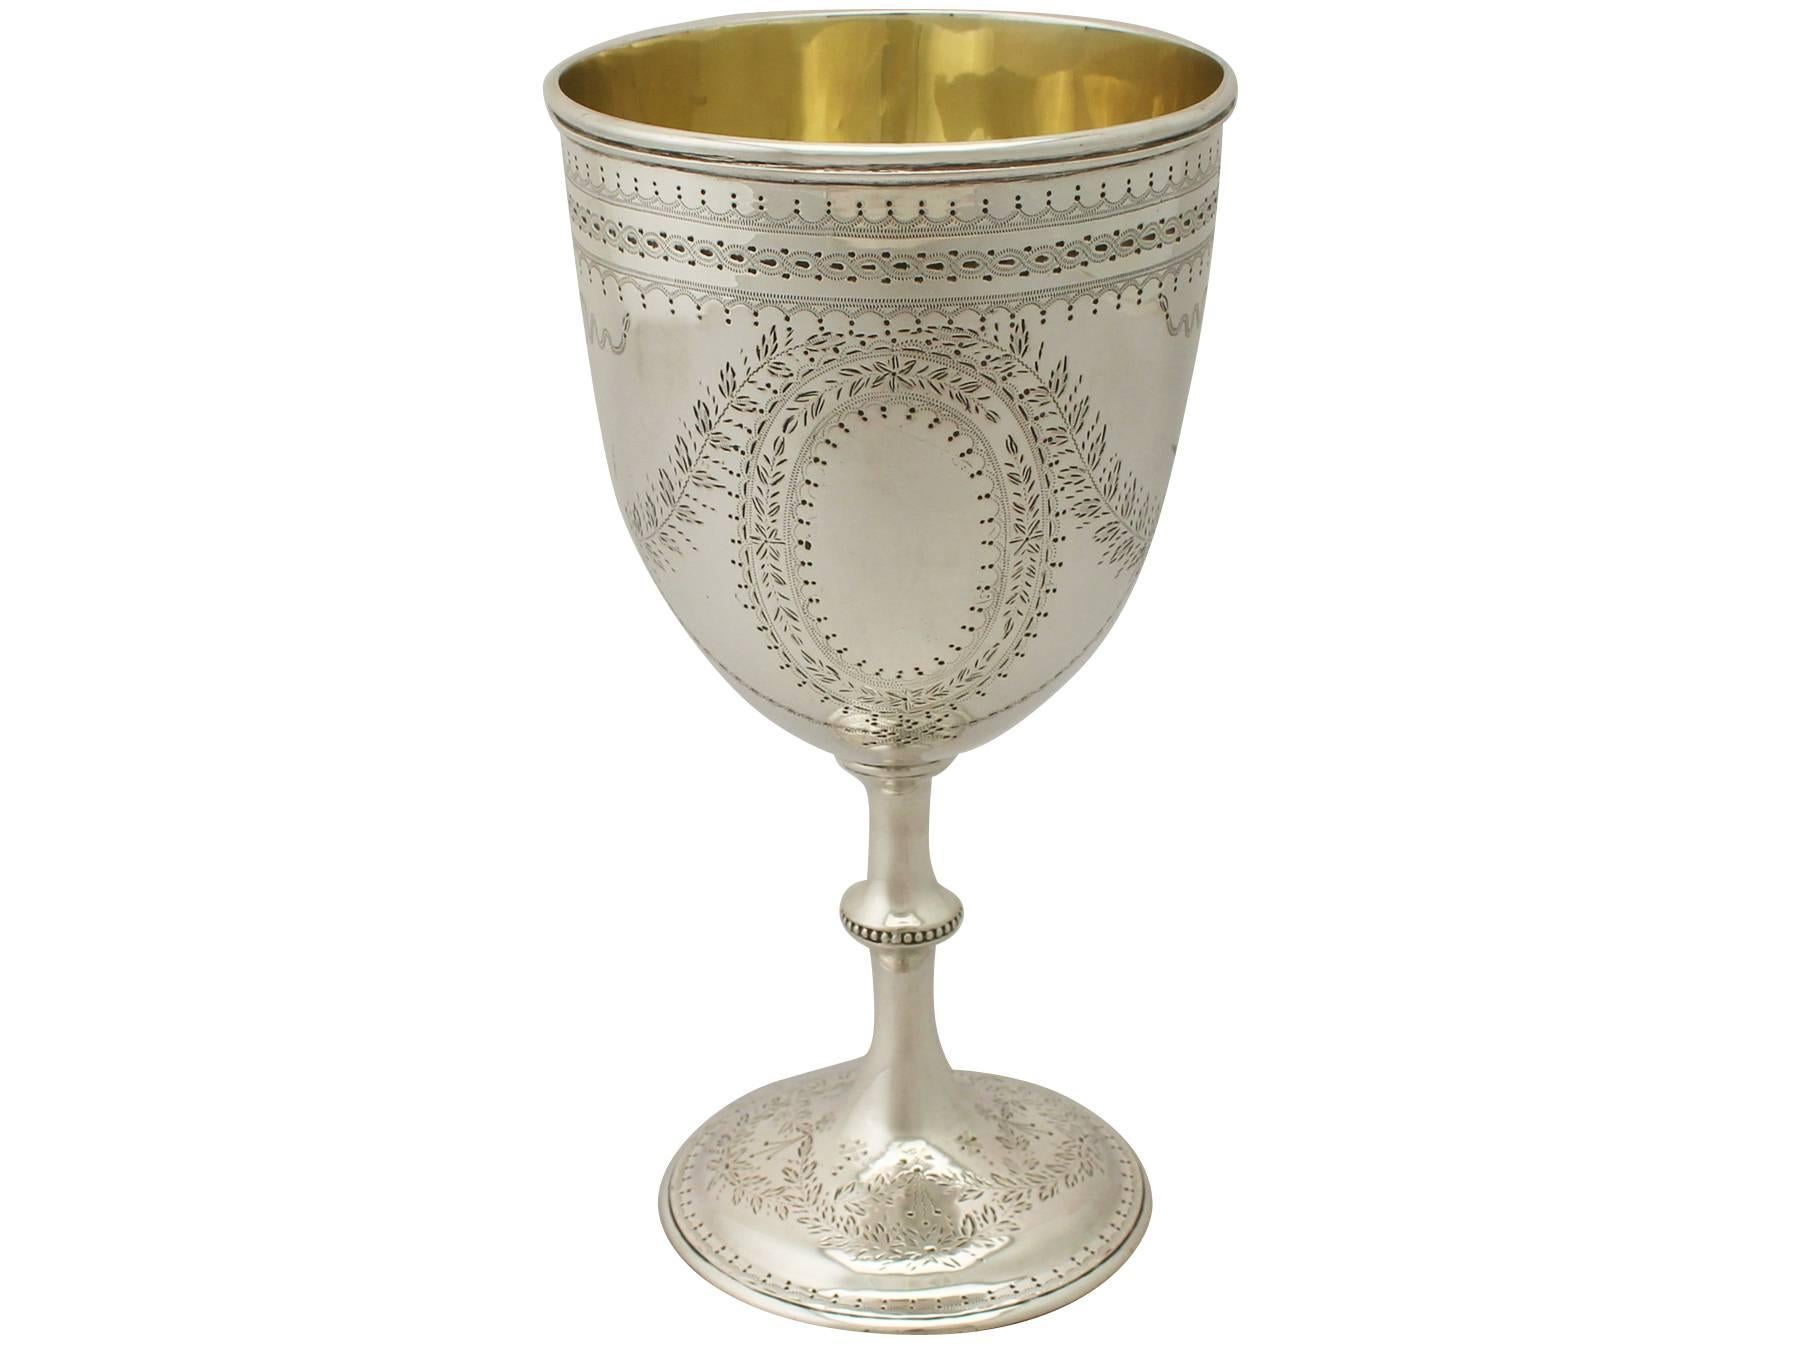 An exceptional, fine and impressive, large antique Victorian English sterling silver goblet: an addition to our collection of wine and drinks related silverware.

This exceptional antique Victorian sterling silver goblet has a circular bell shaped